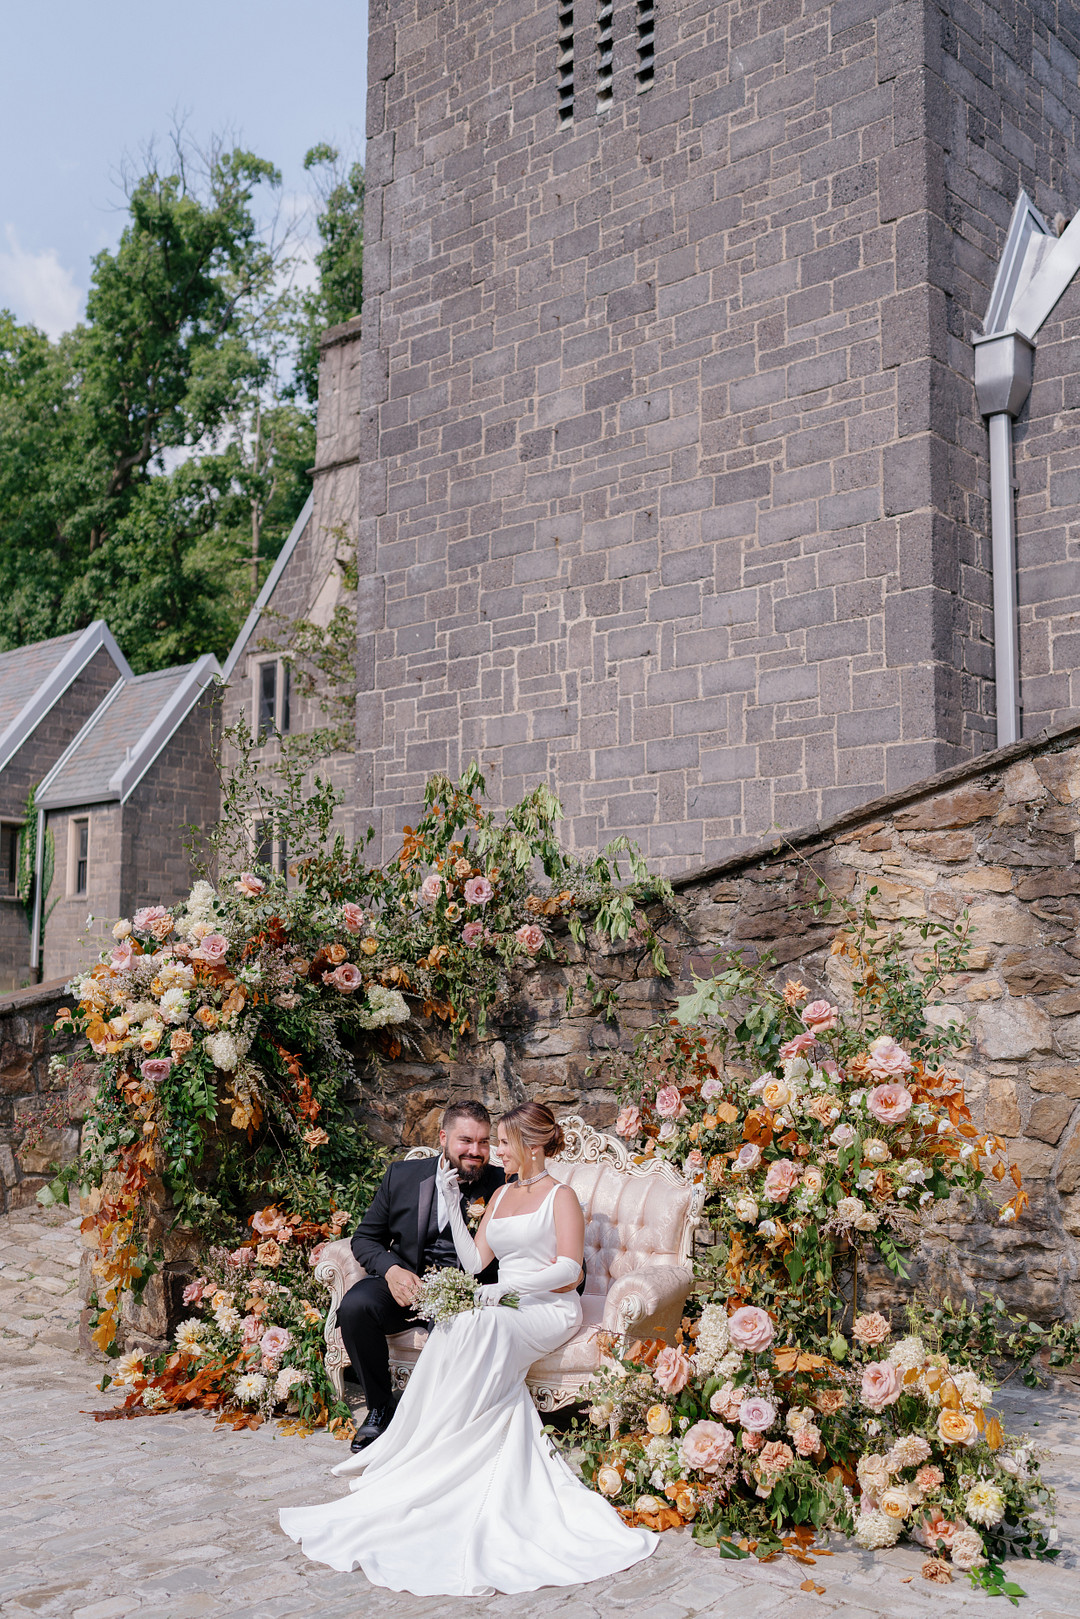 English Countryside Inspiration at The Stable at Hartwood | PA Wedding Inspo